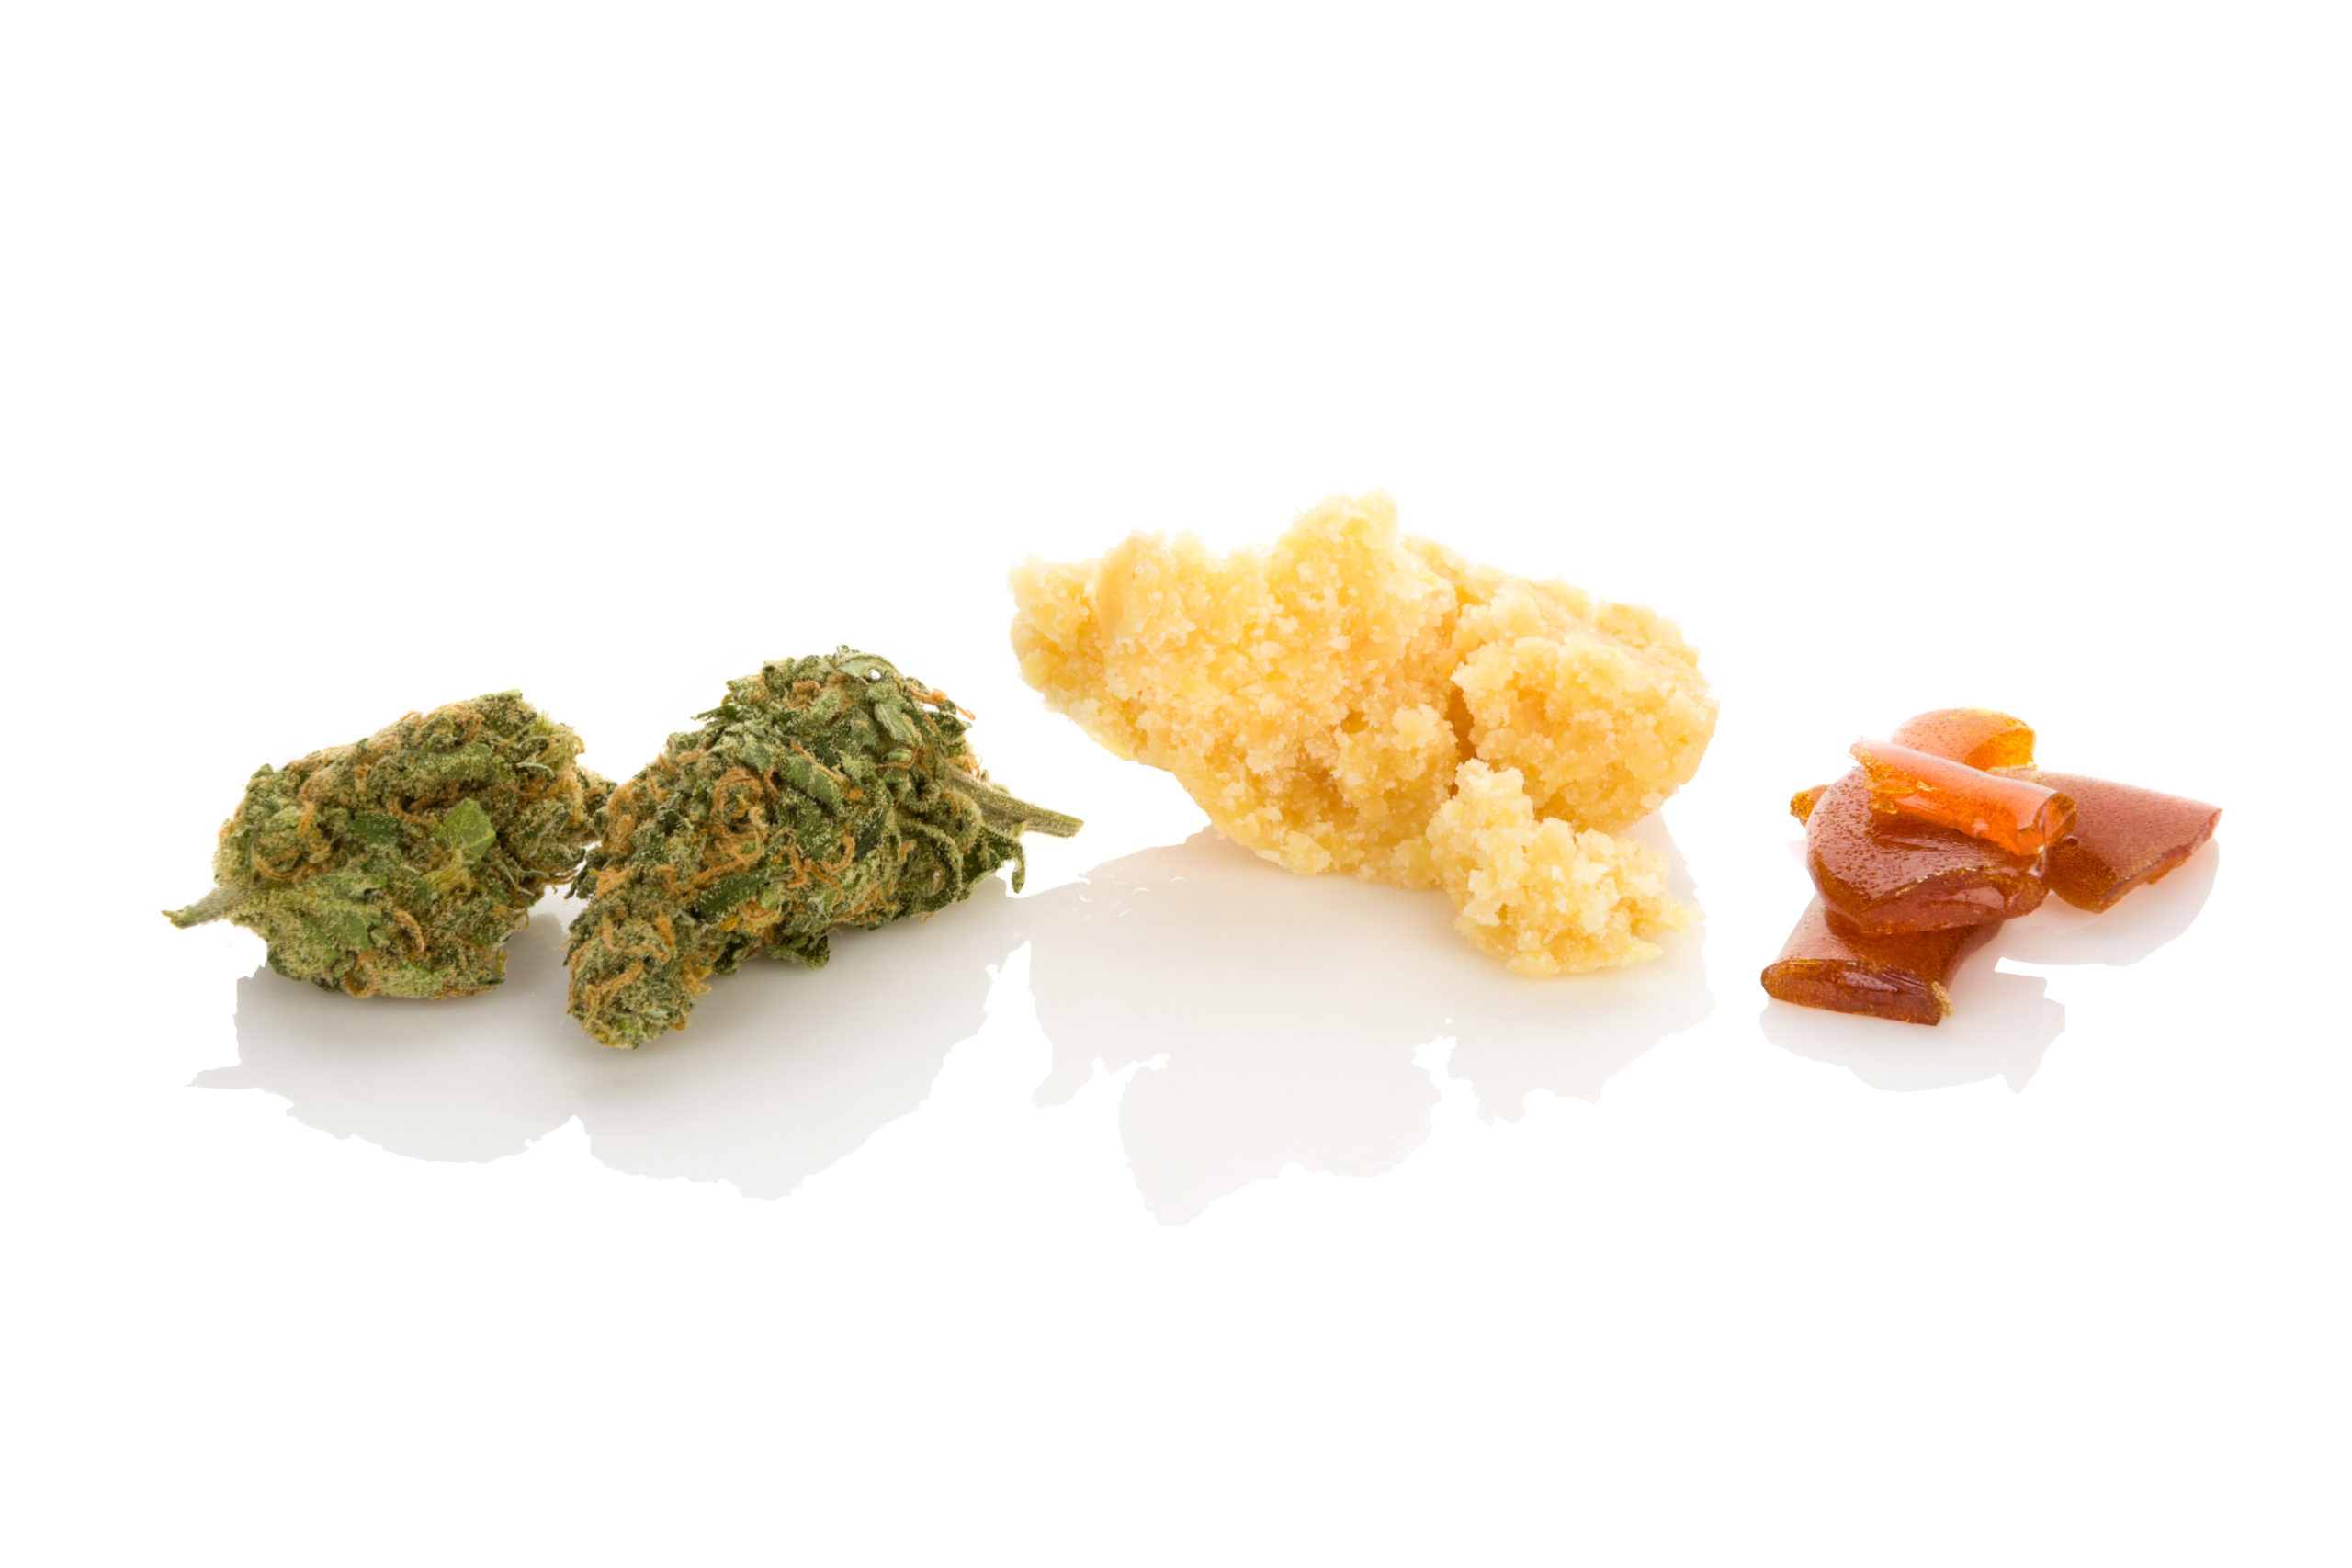 Different Types Of Cannabis Concentrates